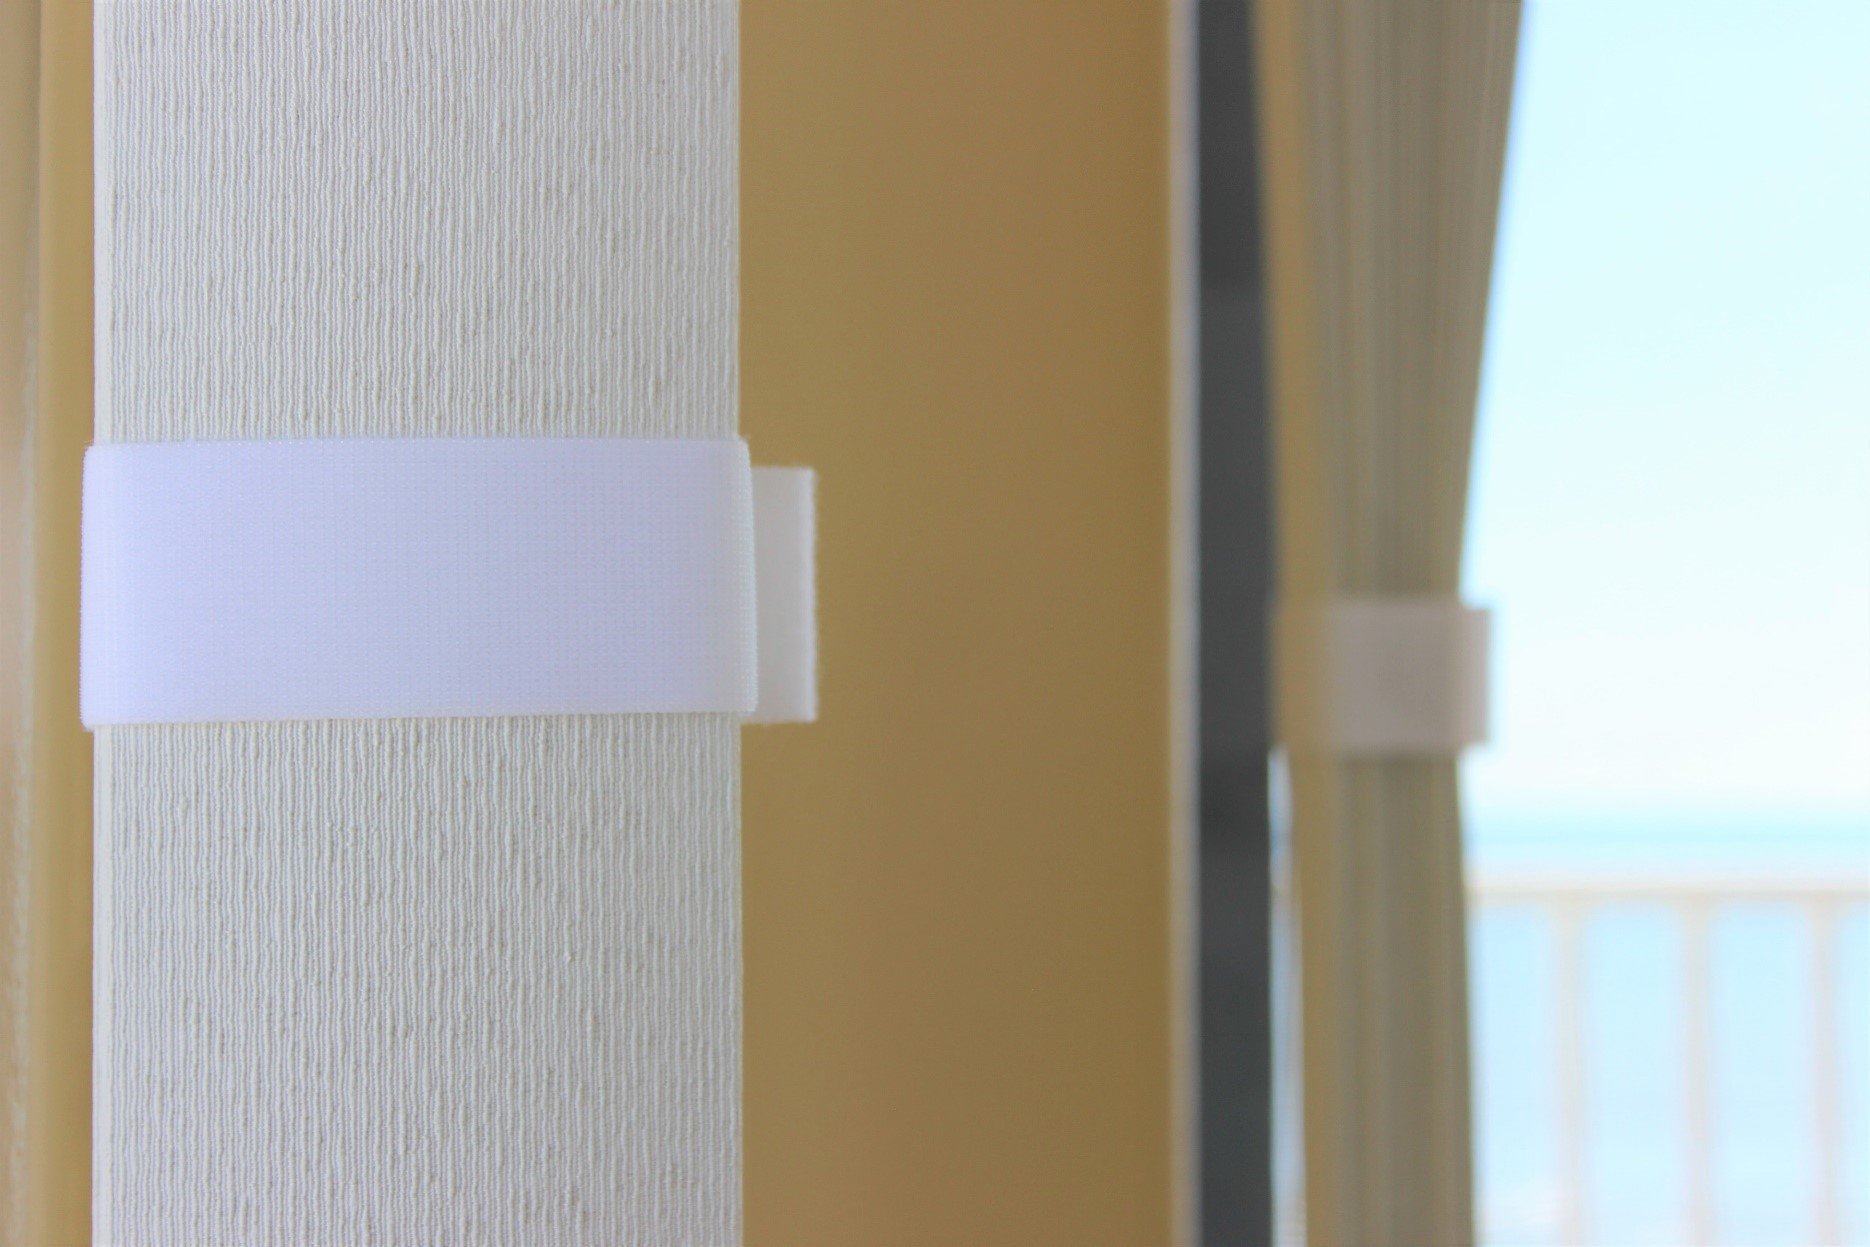 How To Stop Vertical Blinds From Blowing In The Wind